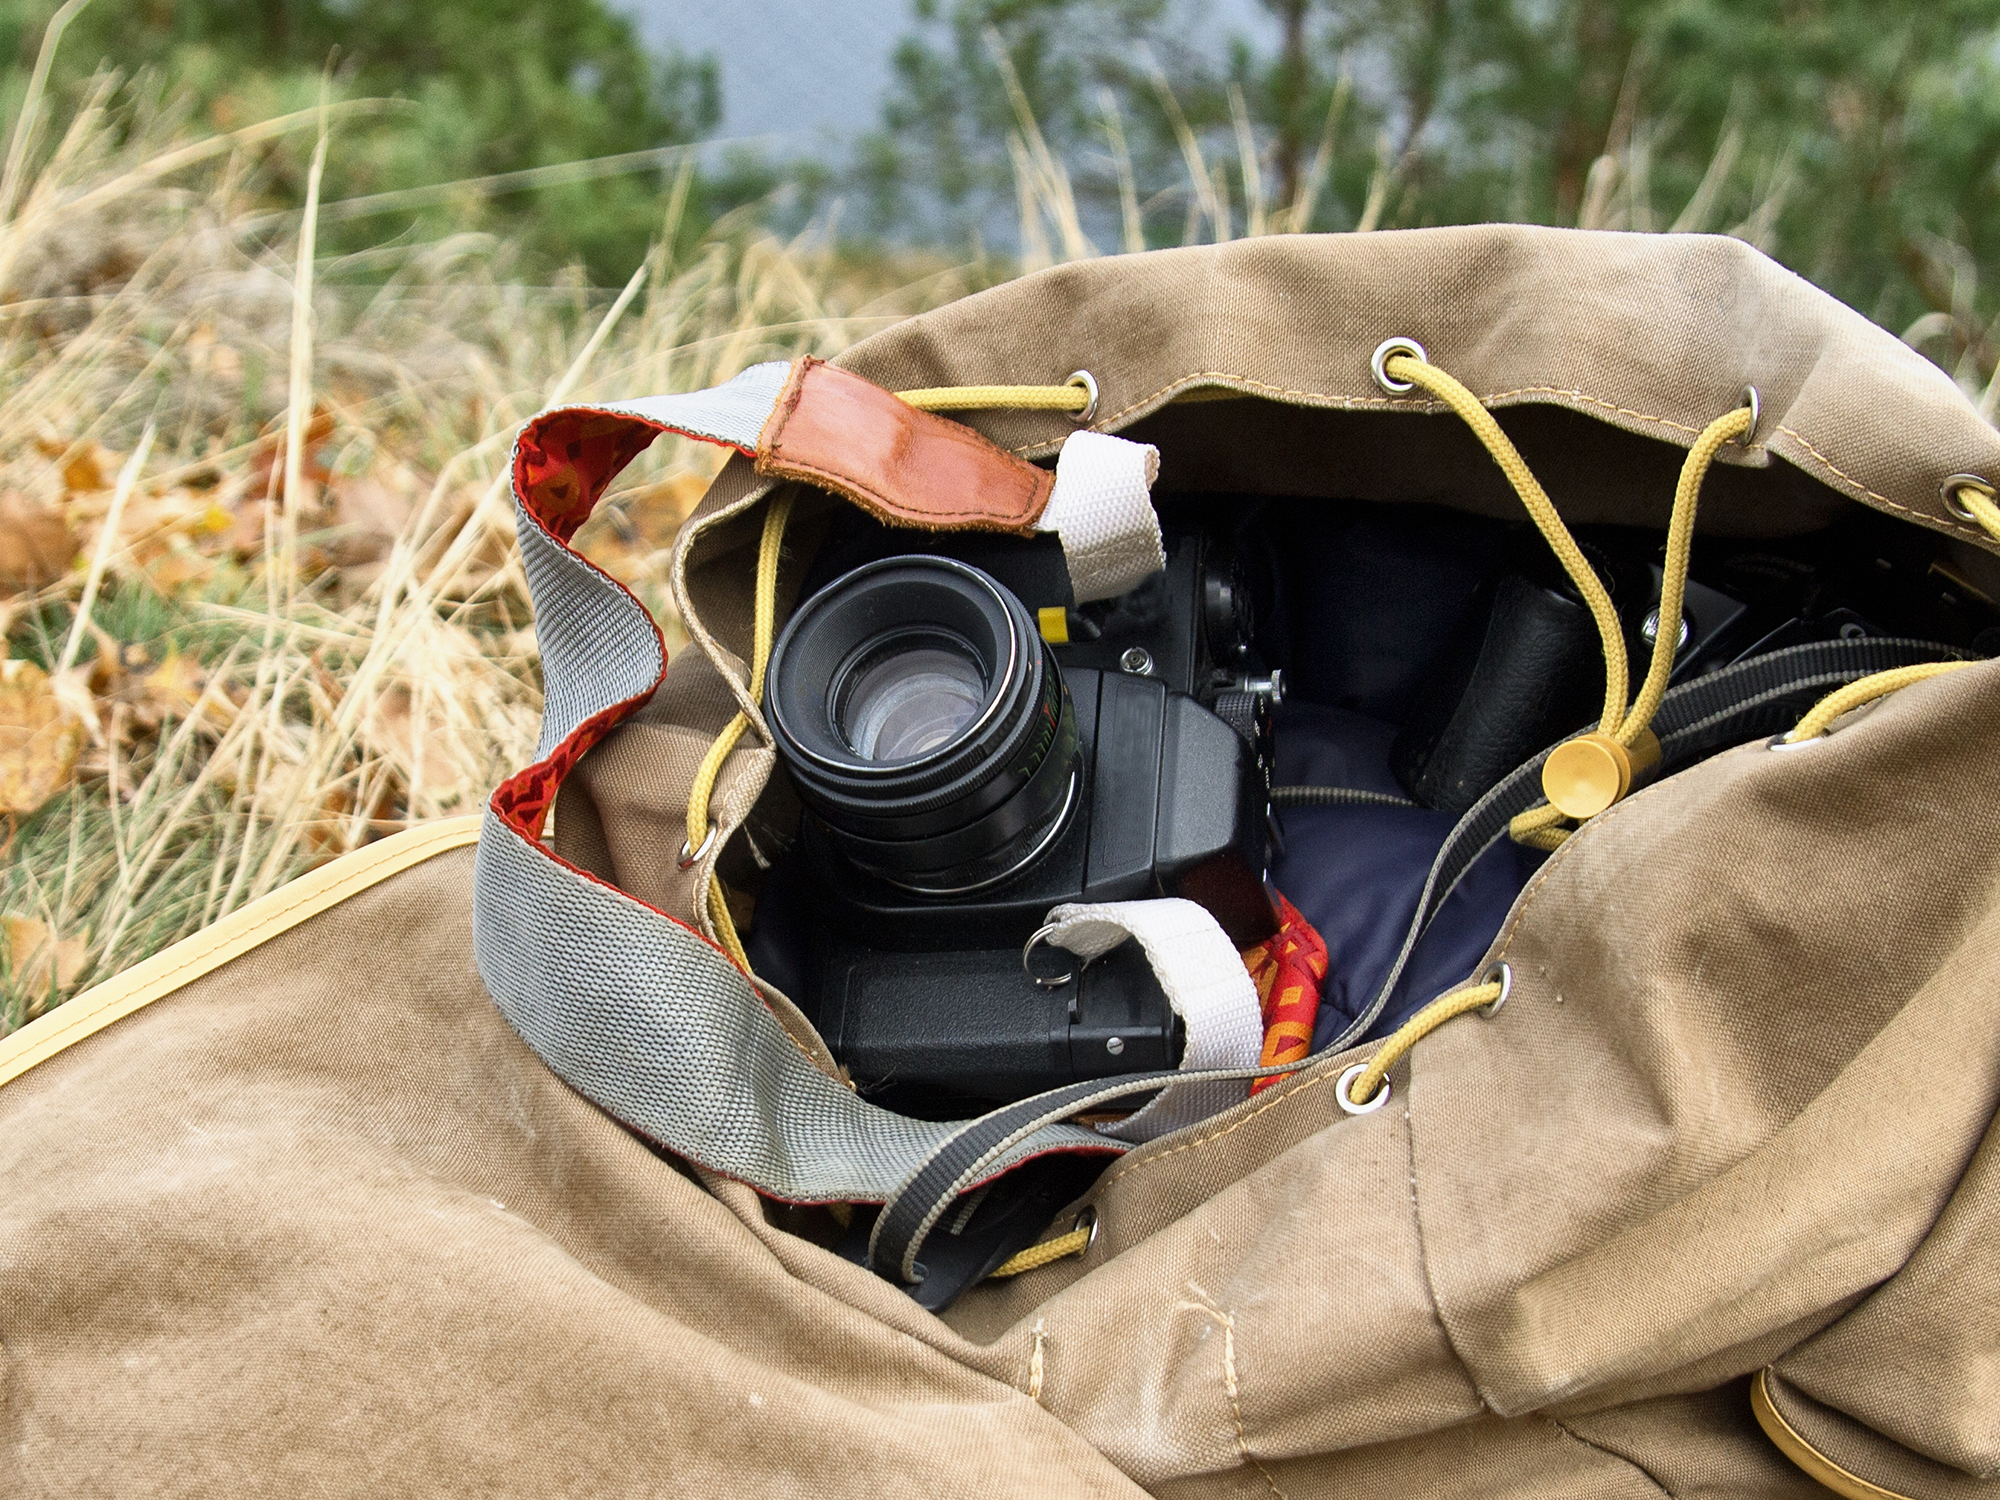 How to protect your camera gear from theft